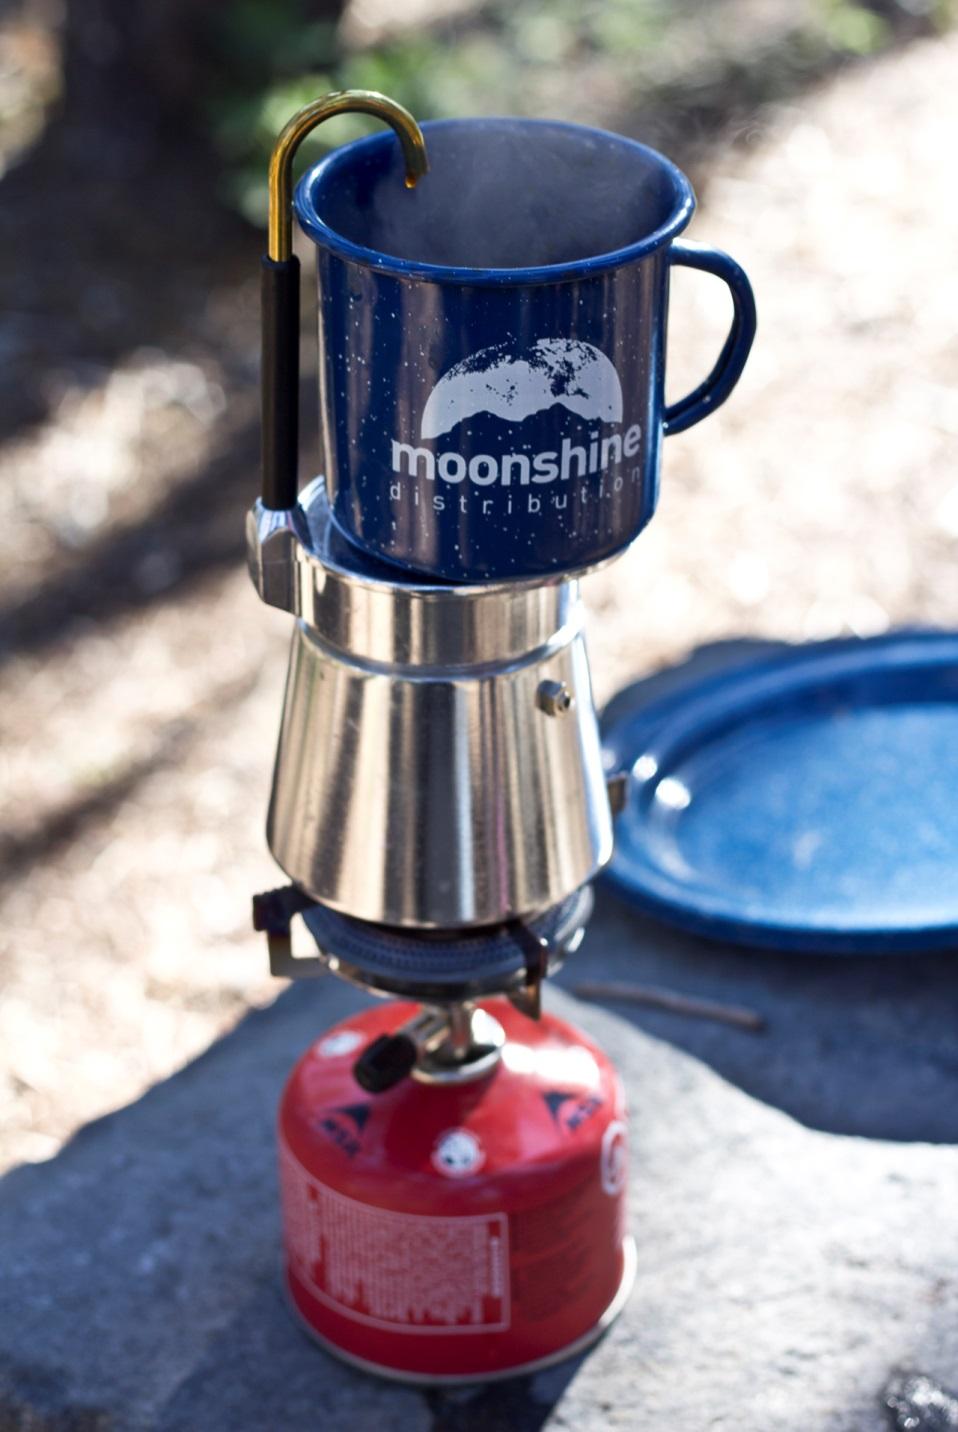 GSI Outdoors 20 Cup Coffee Boiler - Blue